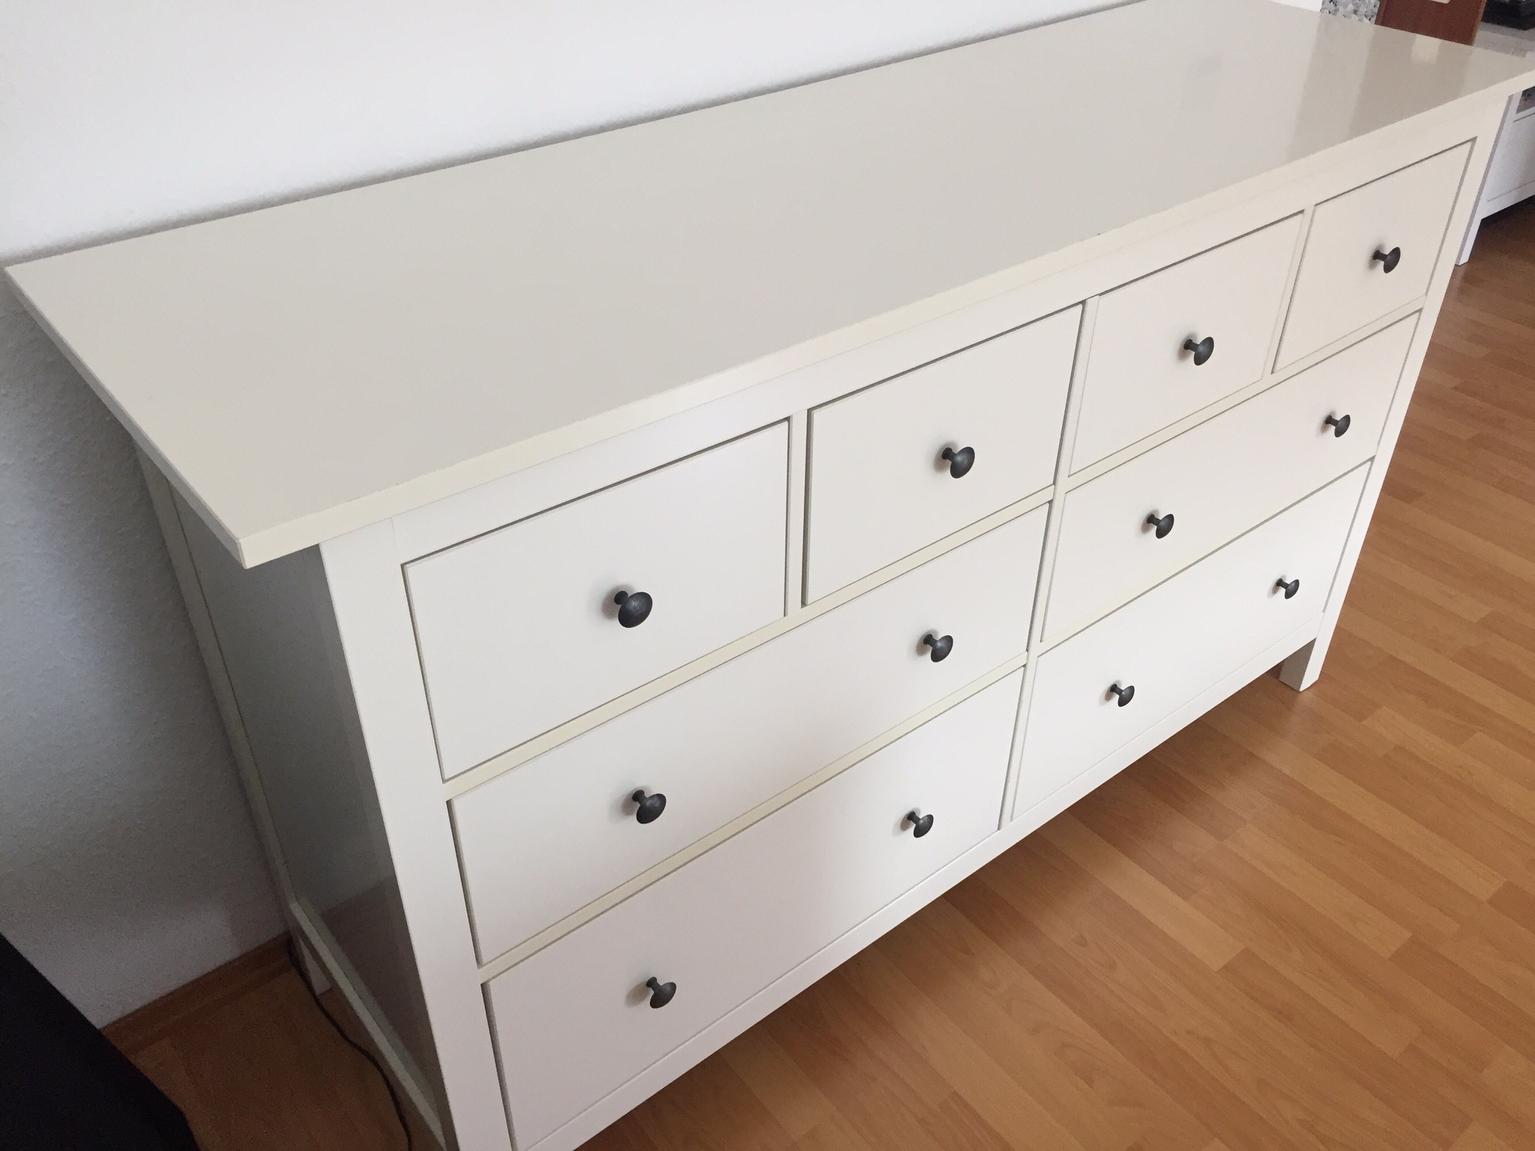 Ikea Kommode Hemnes Weiss Gross In 639 Mannheim For 159 00 For Sale Shpock